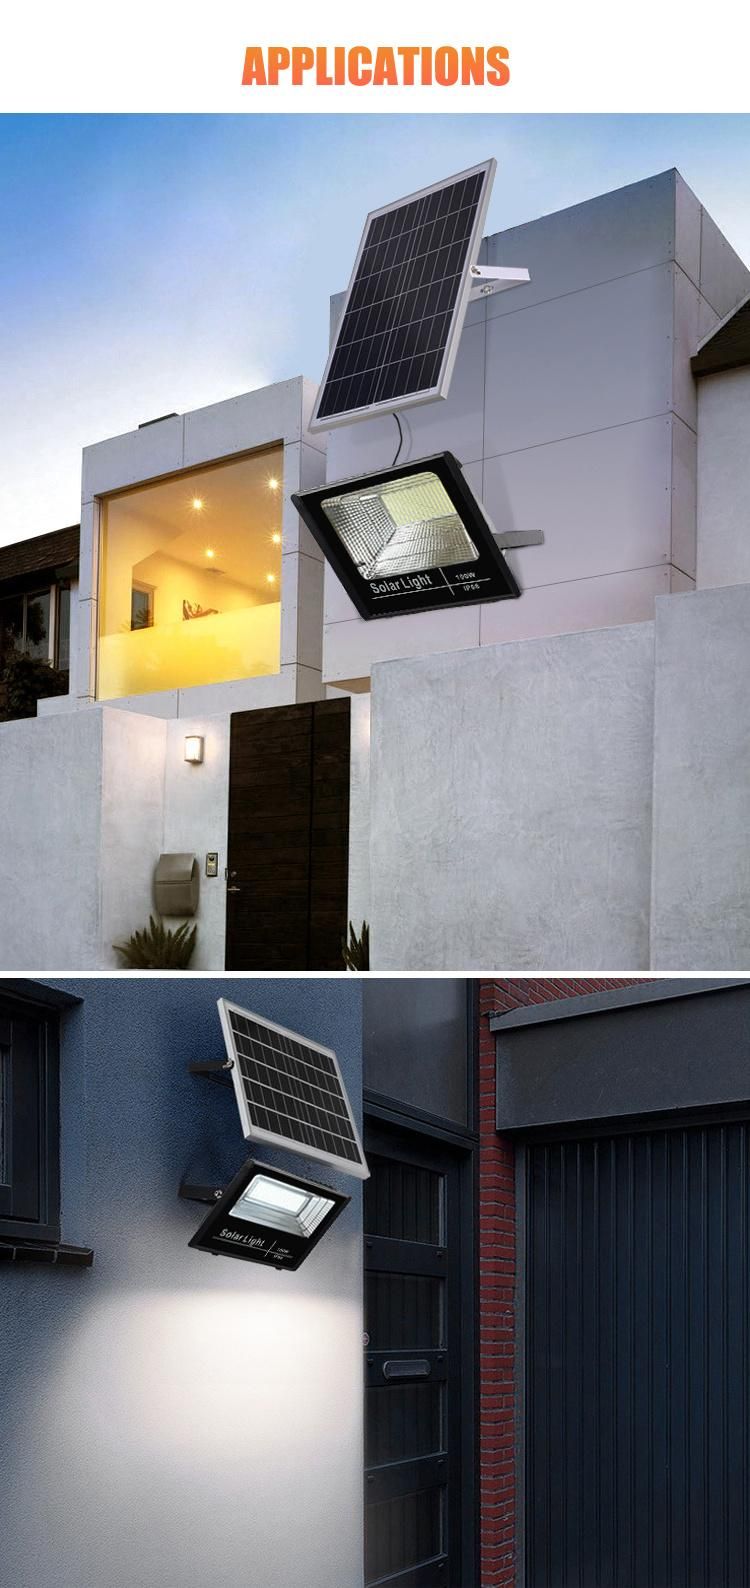 IP66 Waterproof 40W Die-Casting Aluminum Solar Flood Lights with Remote Control